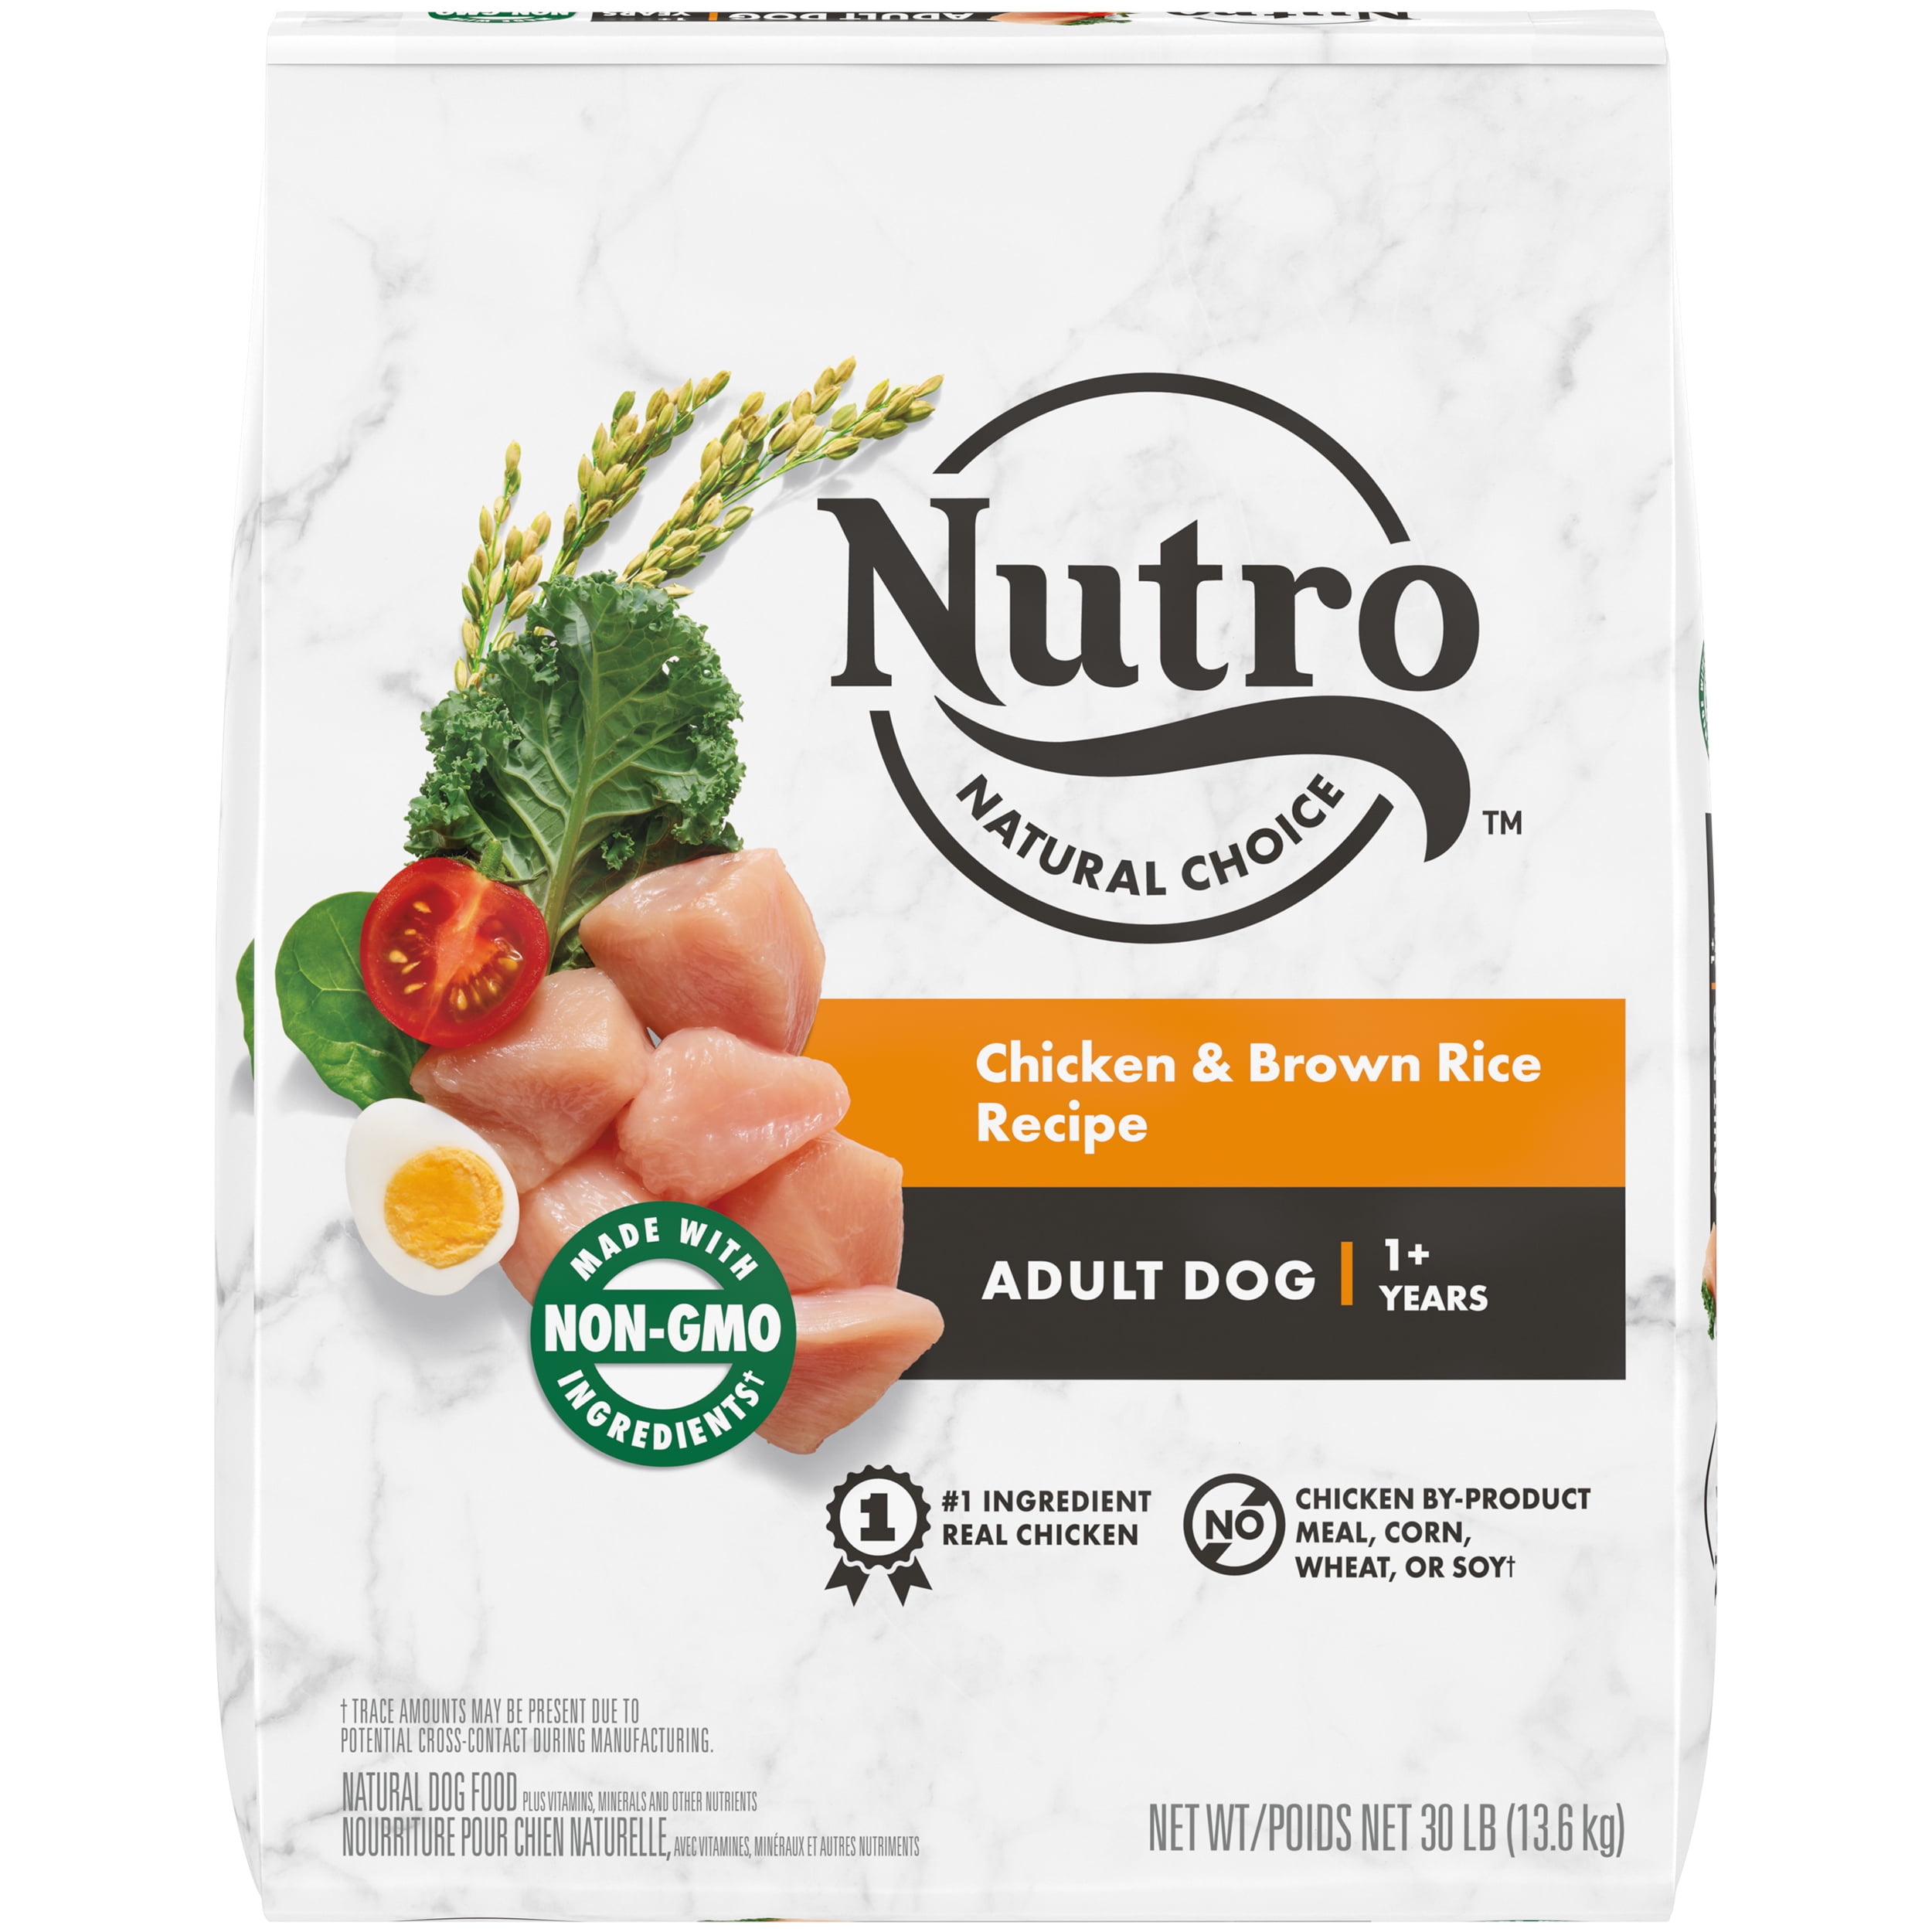 nutro-natural-choice-adult-dry-dog-food-chicken-brown-rice-recipe